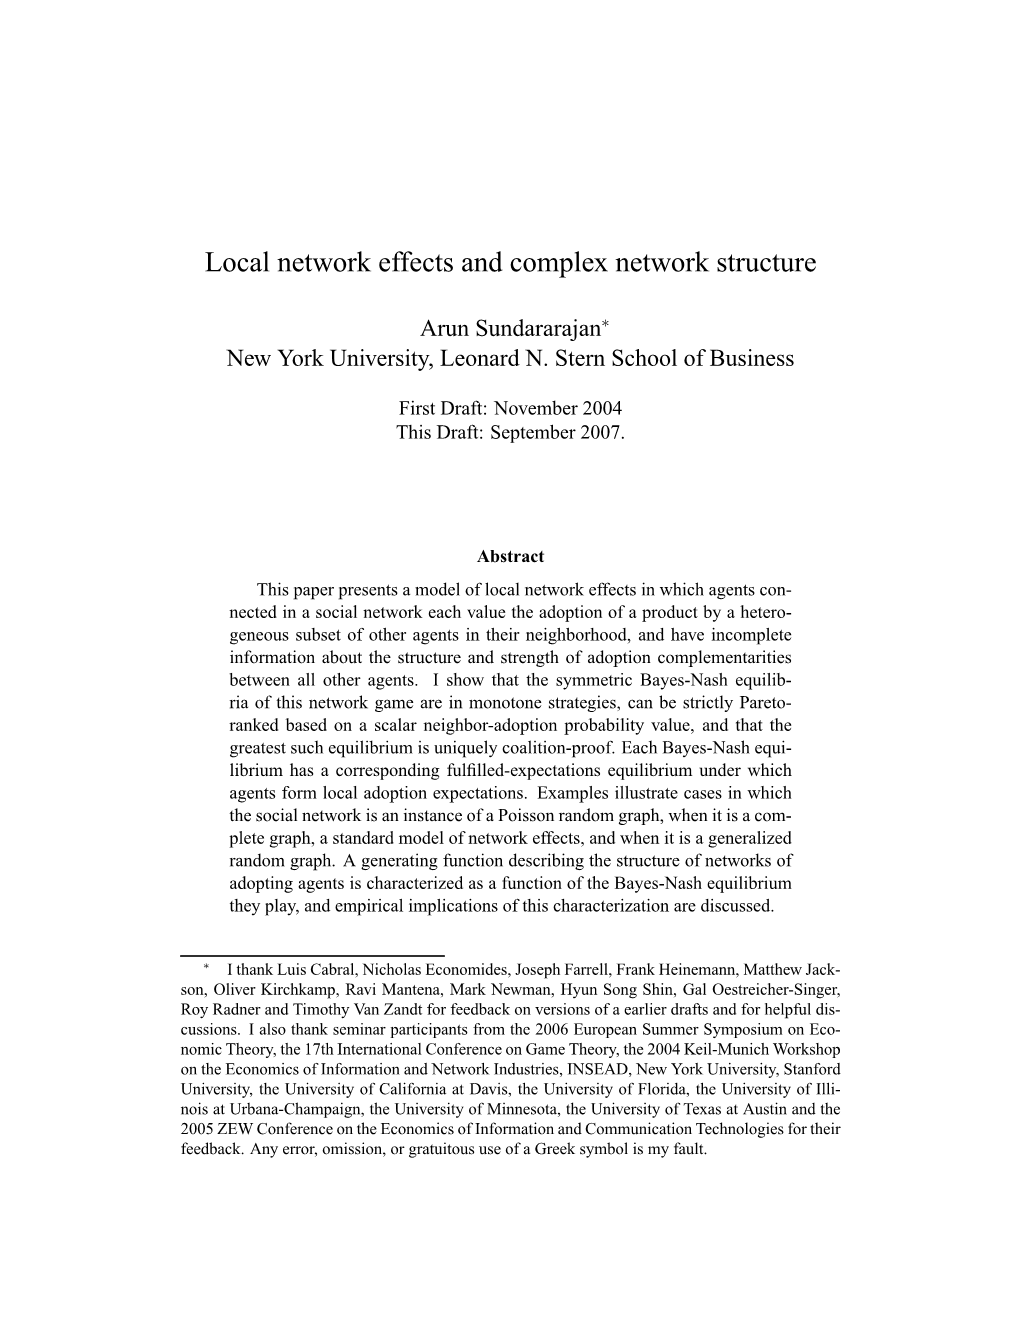 Local Network Effects and Complex Network Structure